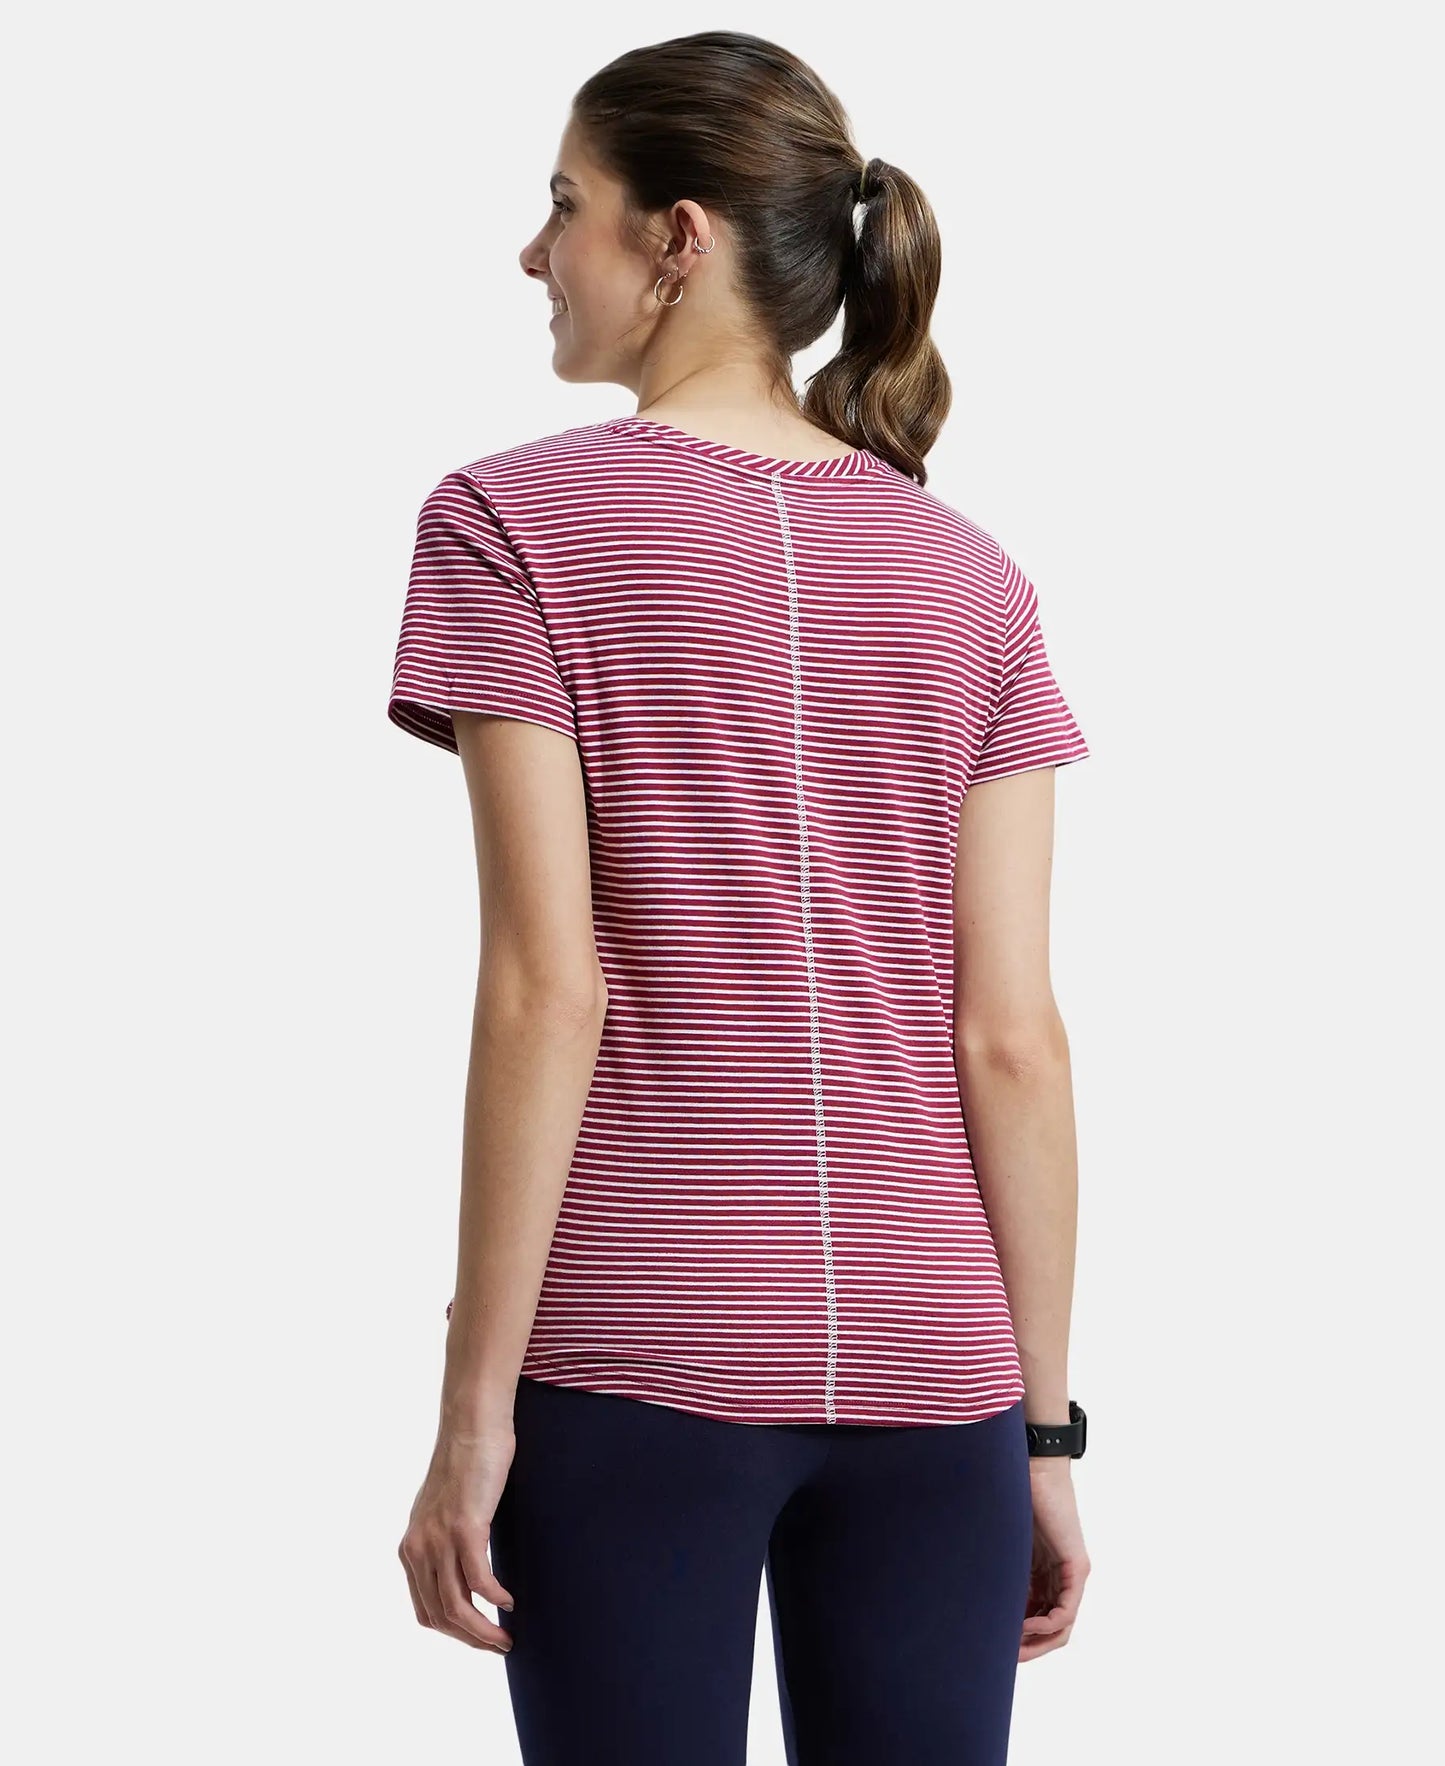 Super Combed Cotton Stripe Fabric Relaxed Fit Round Neck Half Sleeve T-Shirt with Curved Hem Styling - Red Plum-3